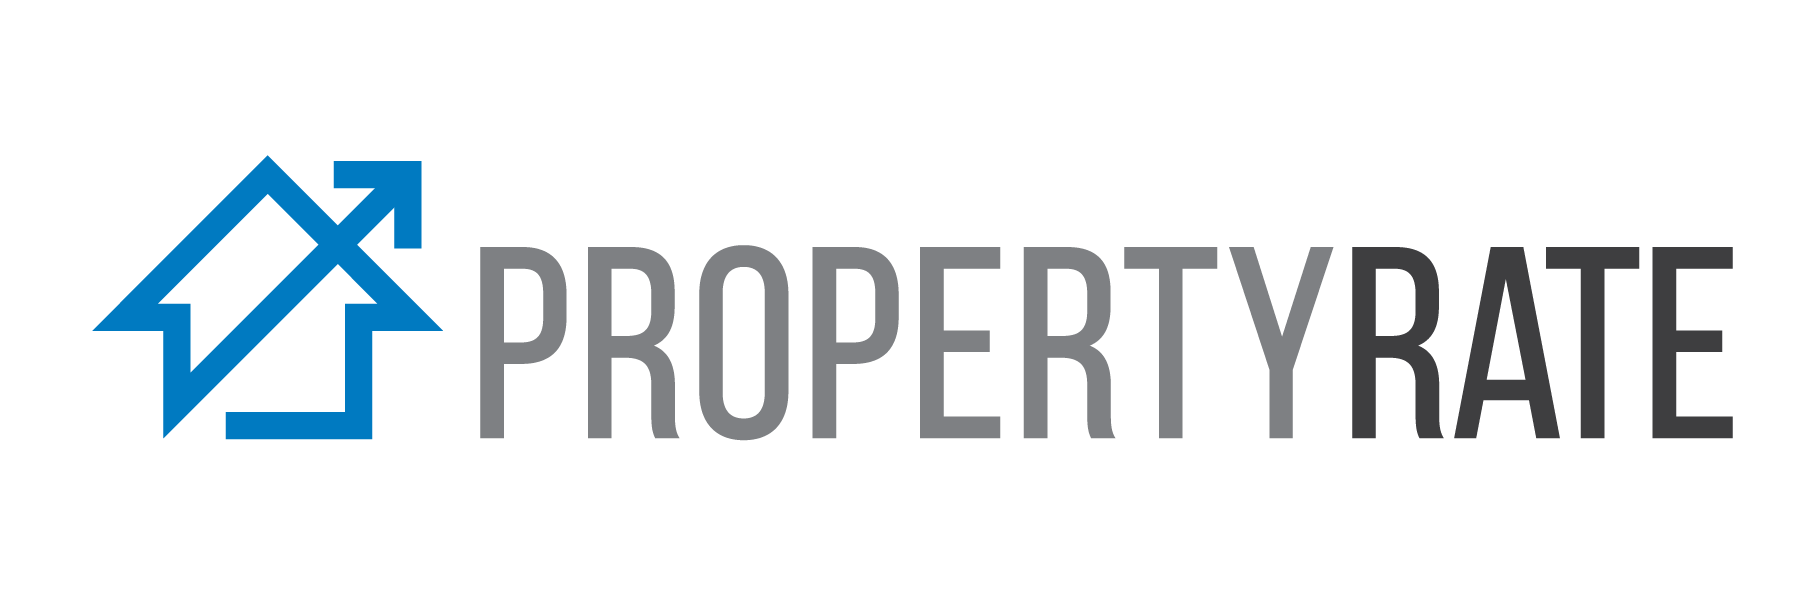 Property Rate